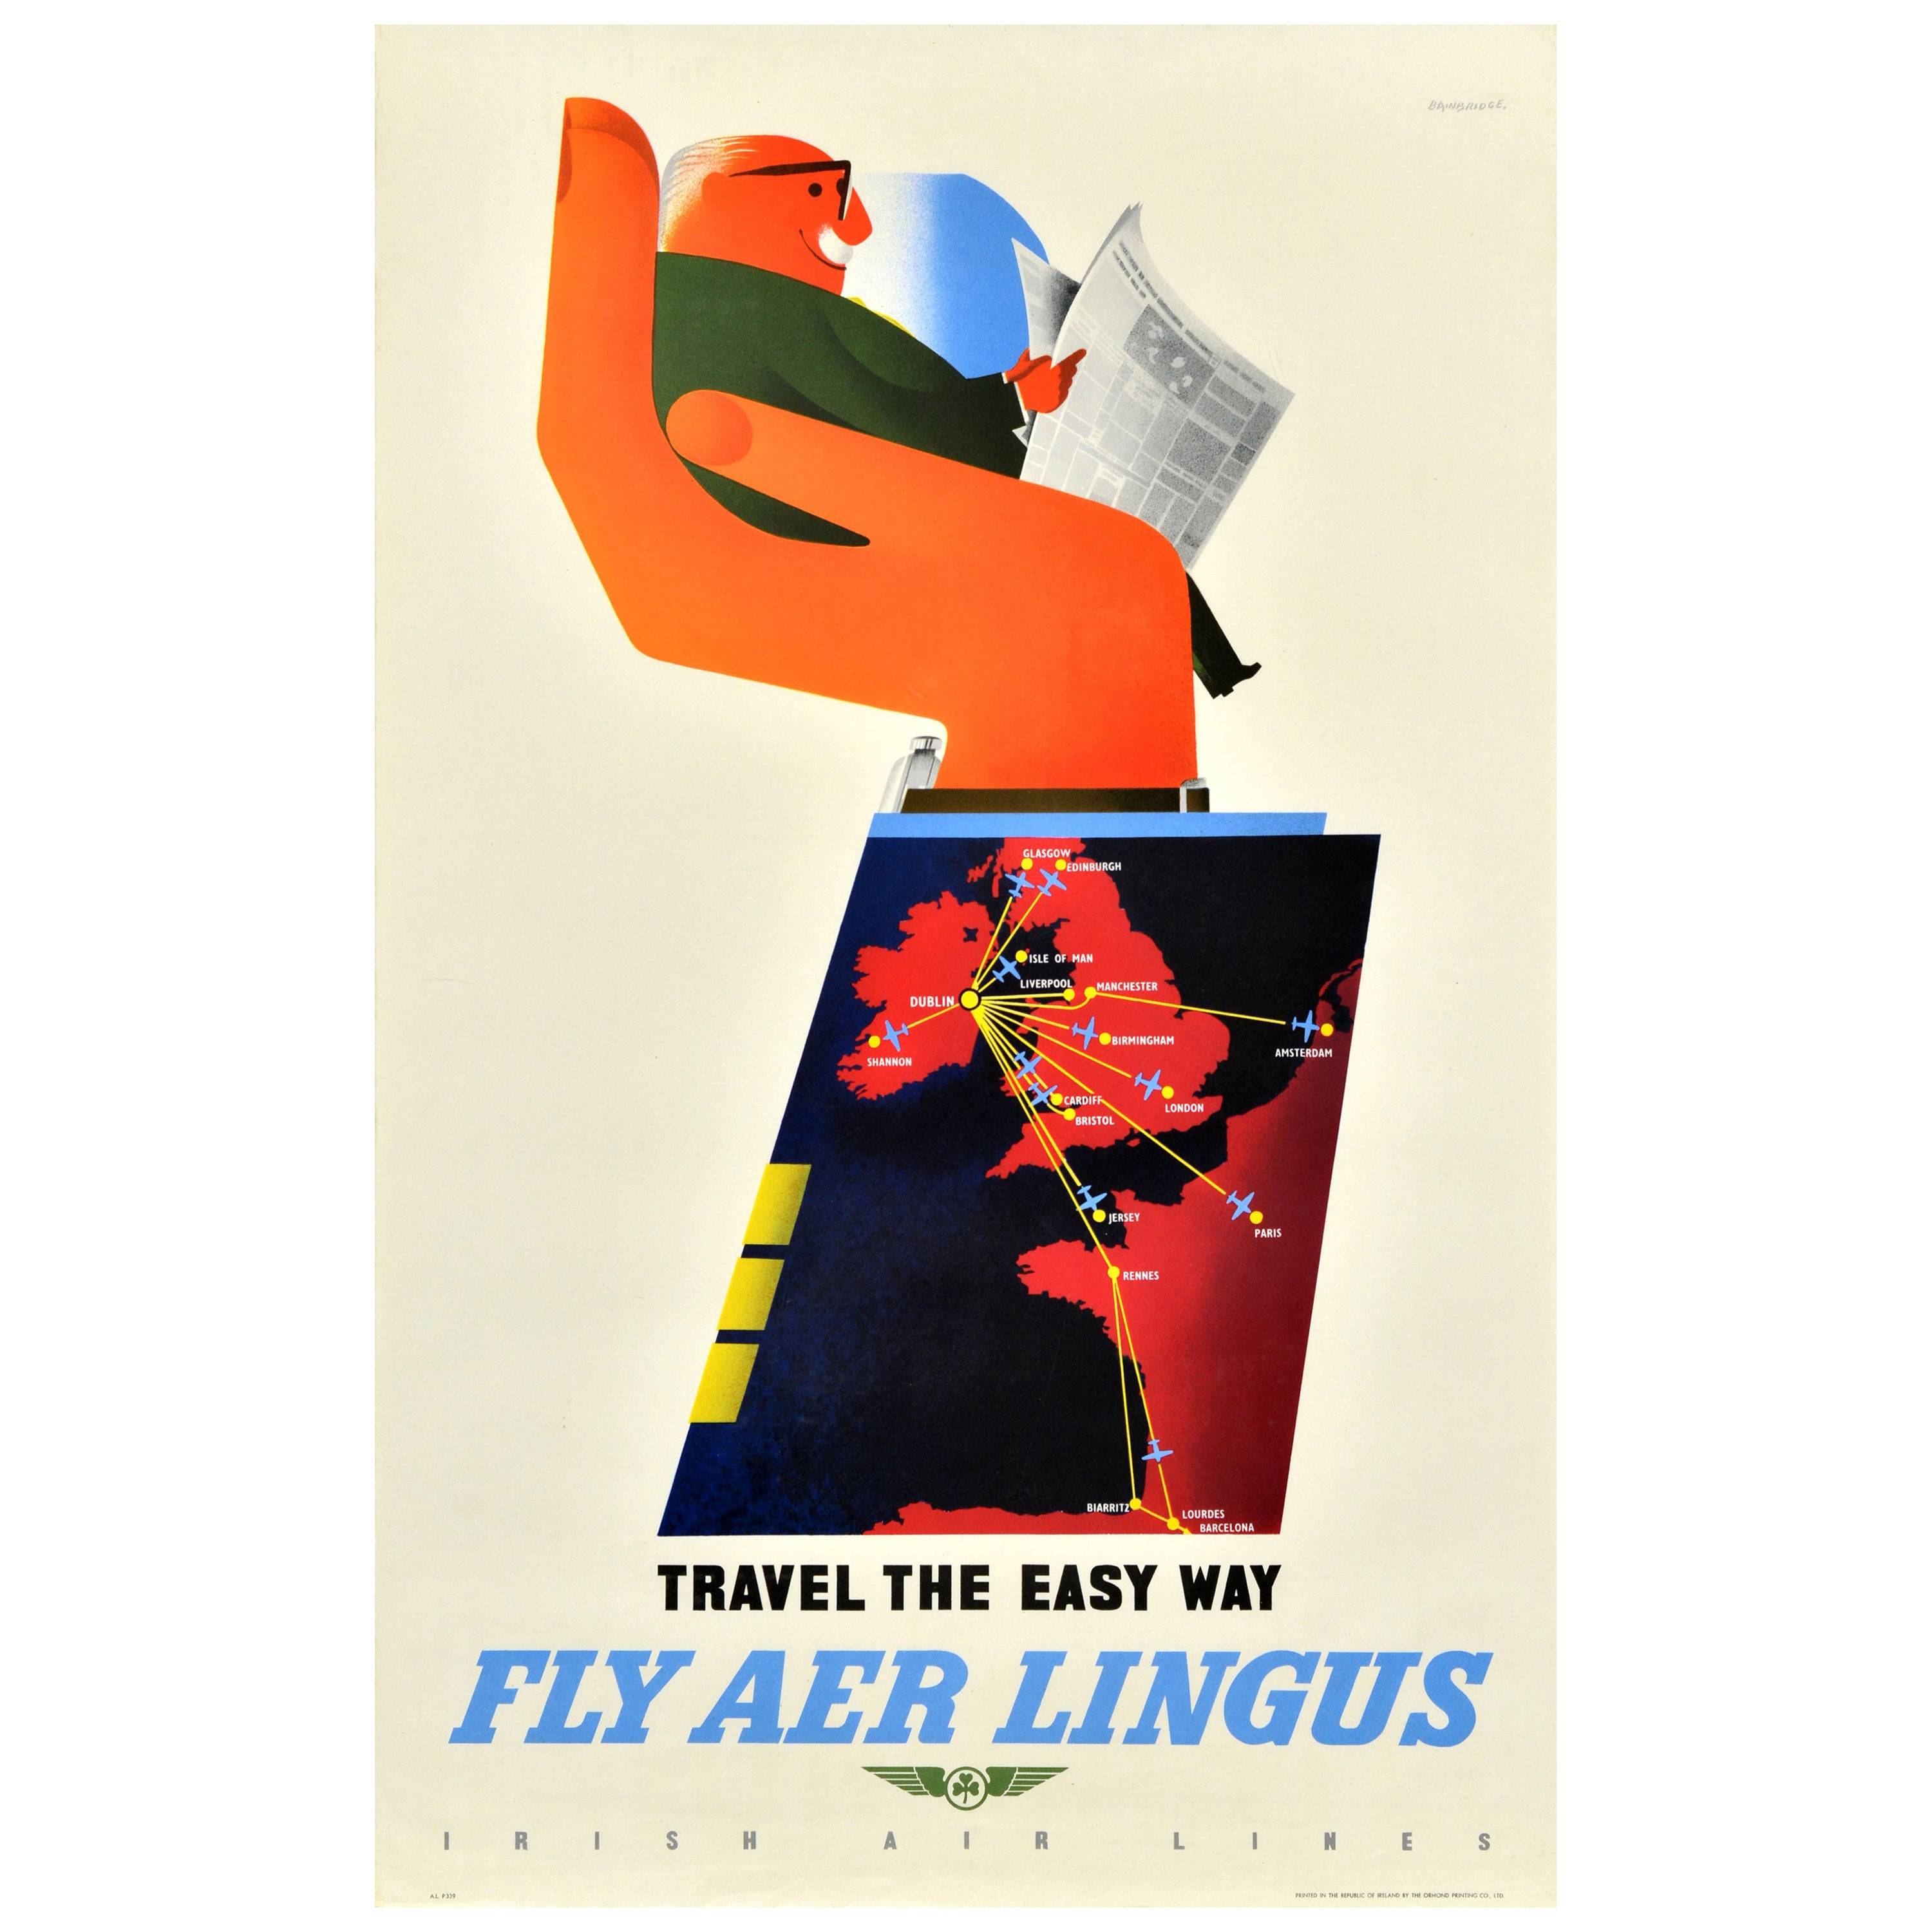 What is a travel poster?